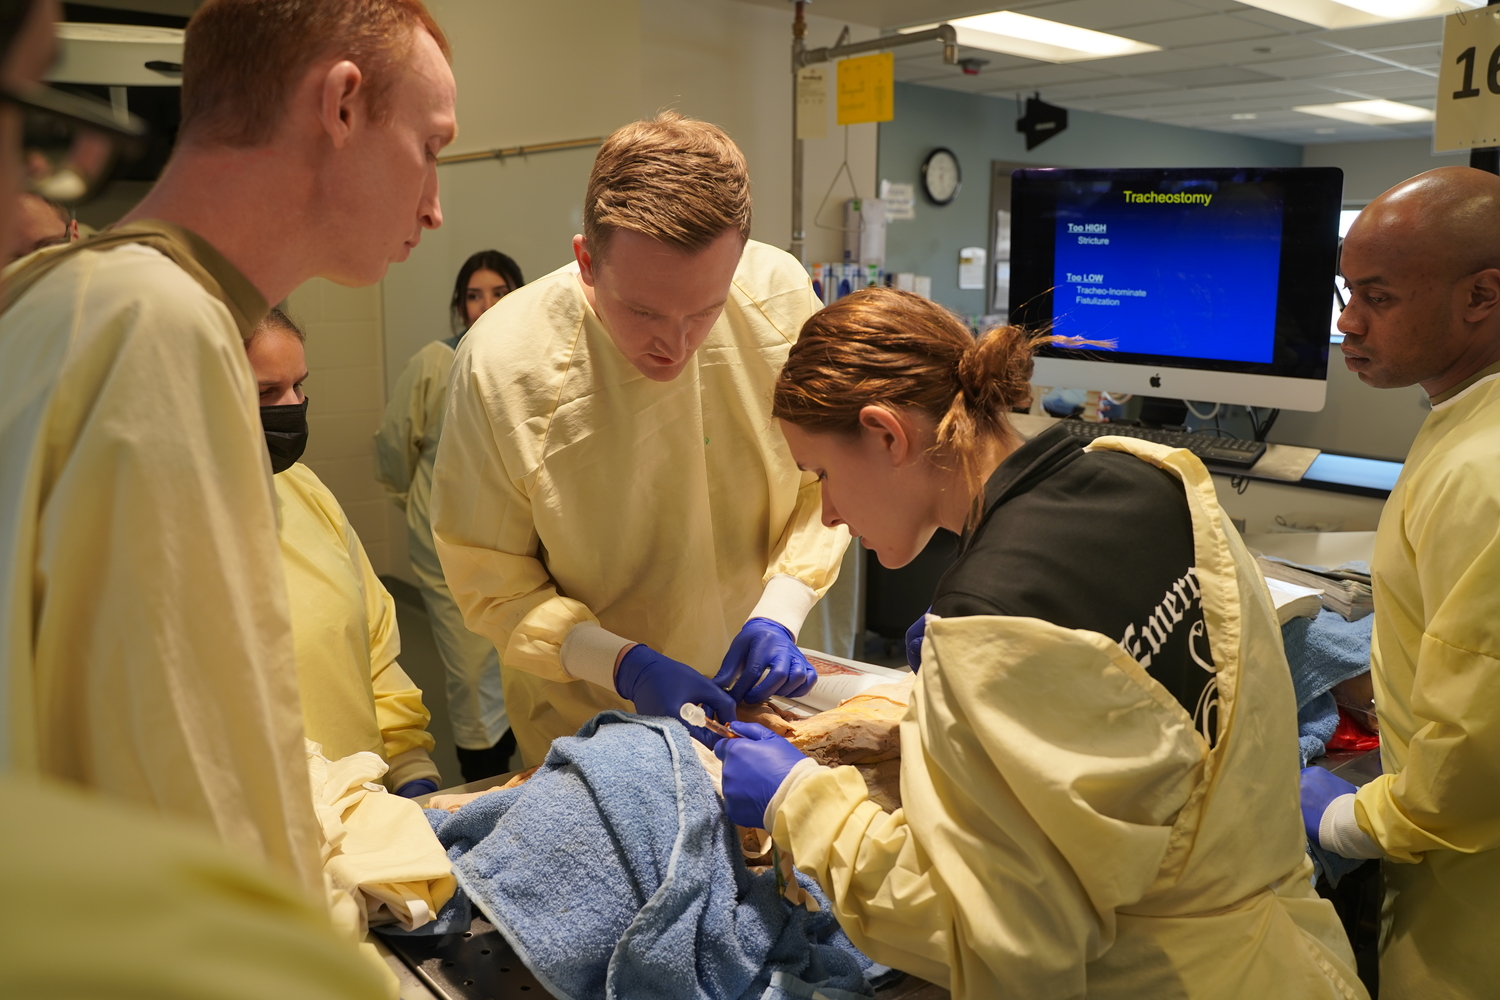 An image of military medics in OUWB's Anatomy Lab